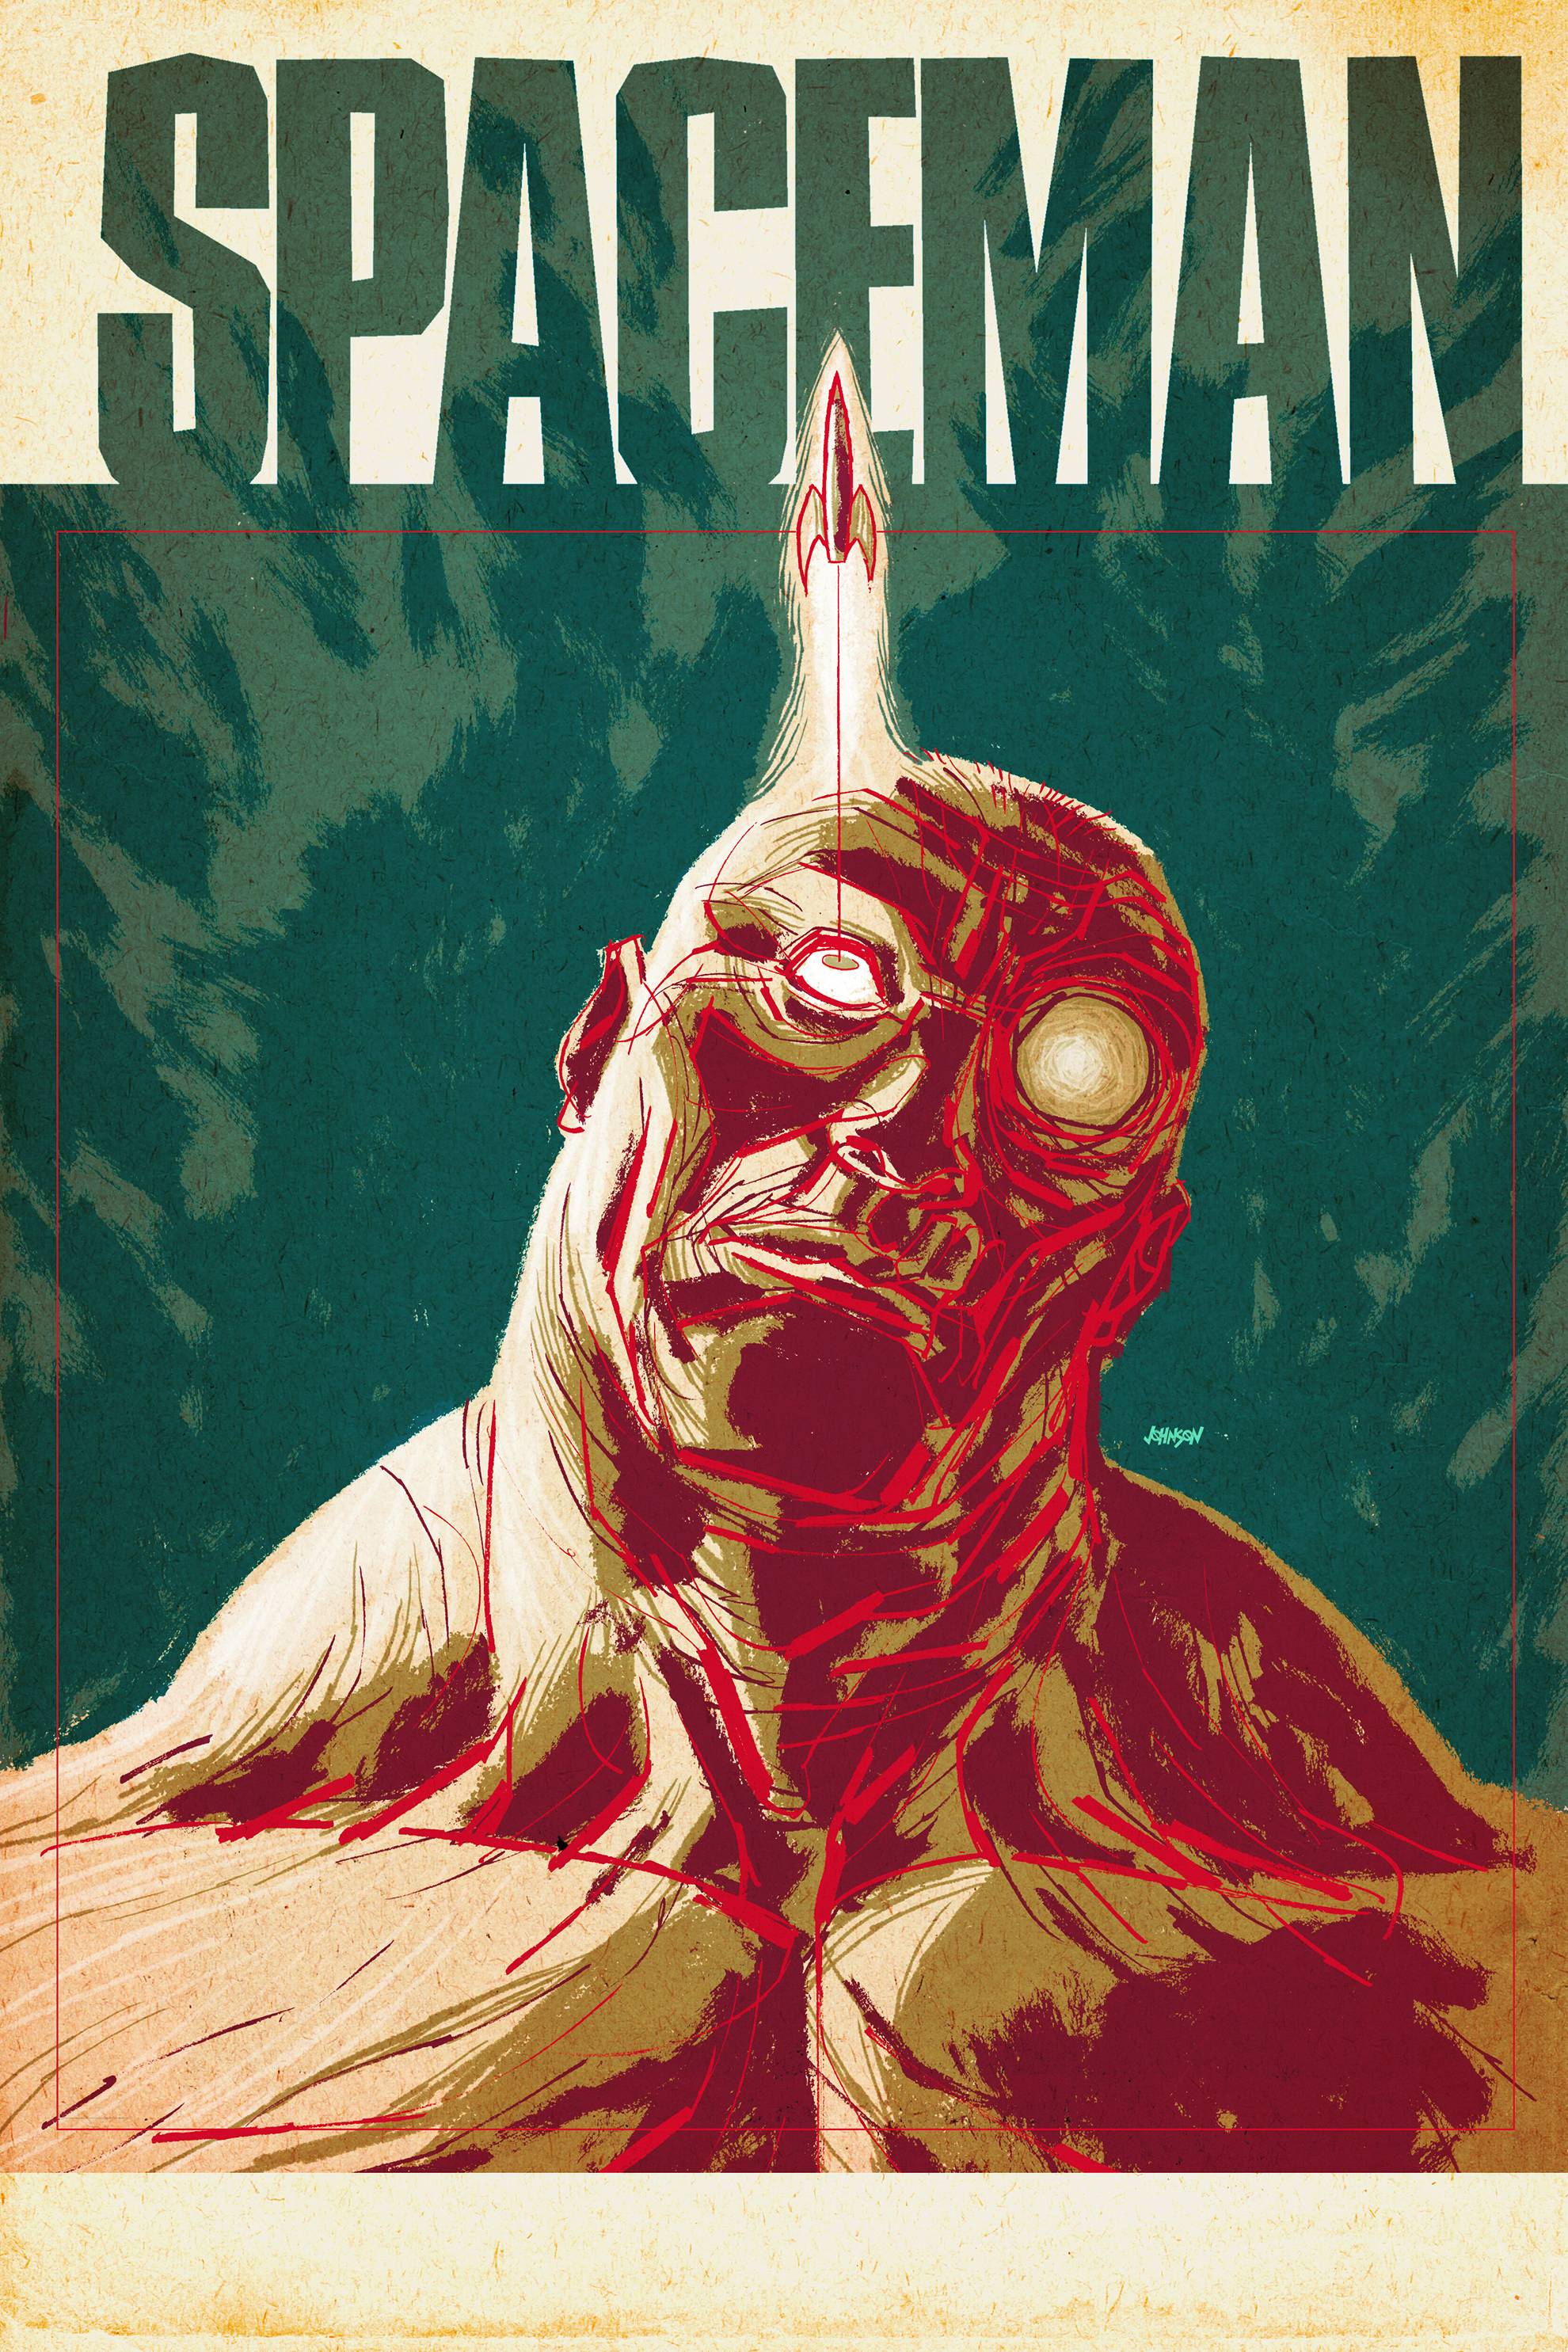 Spaceman #1